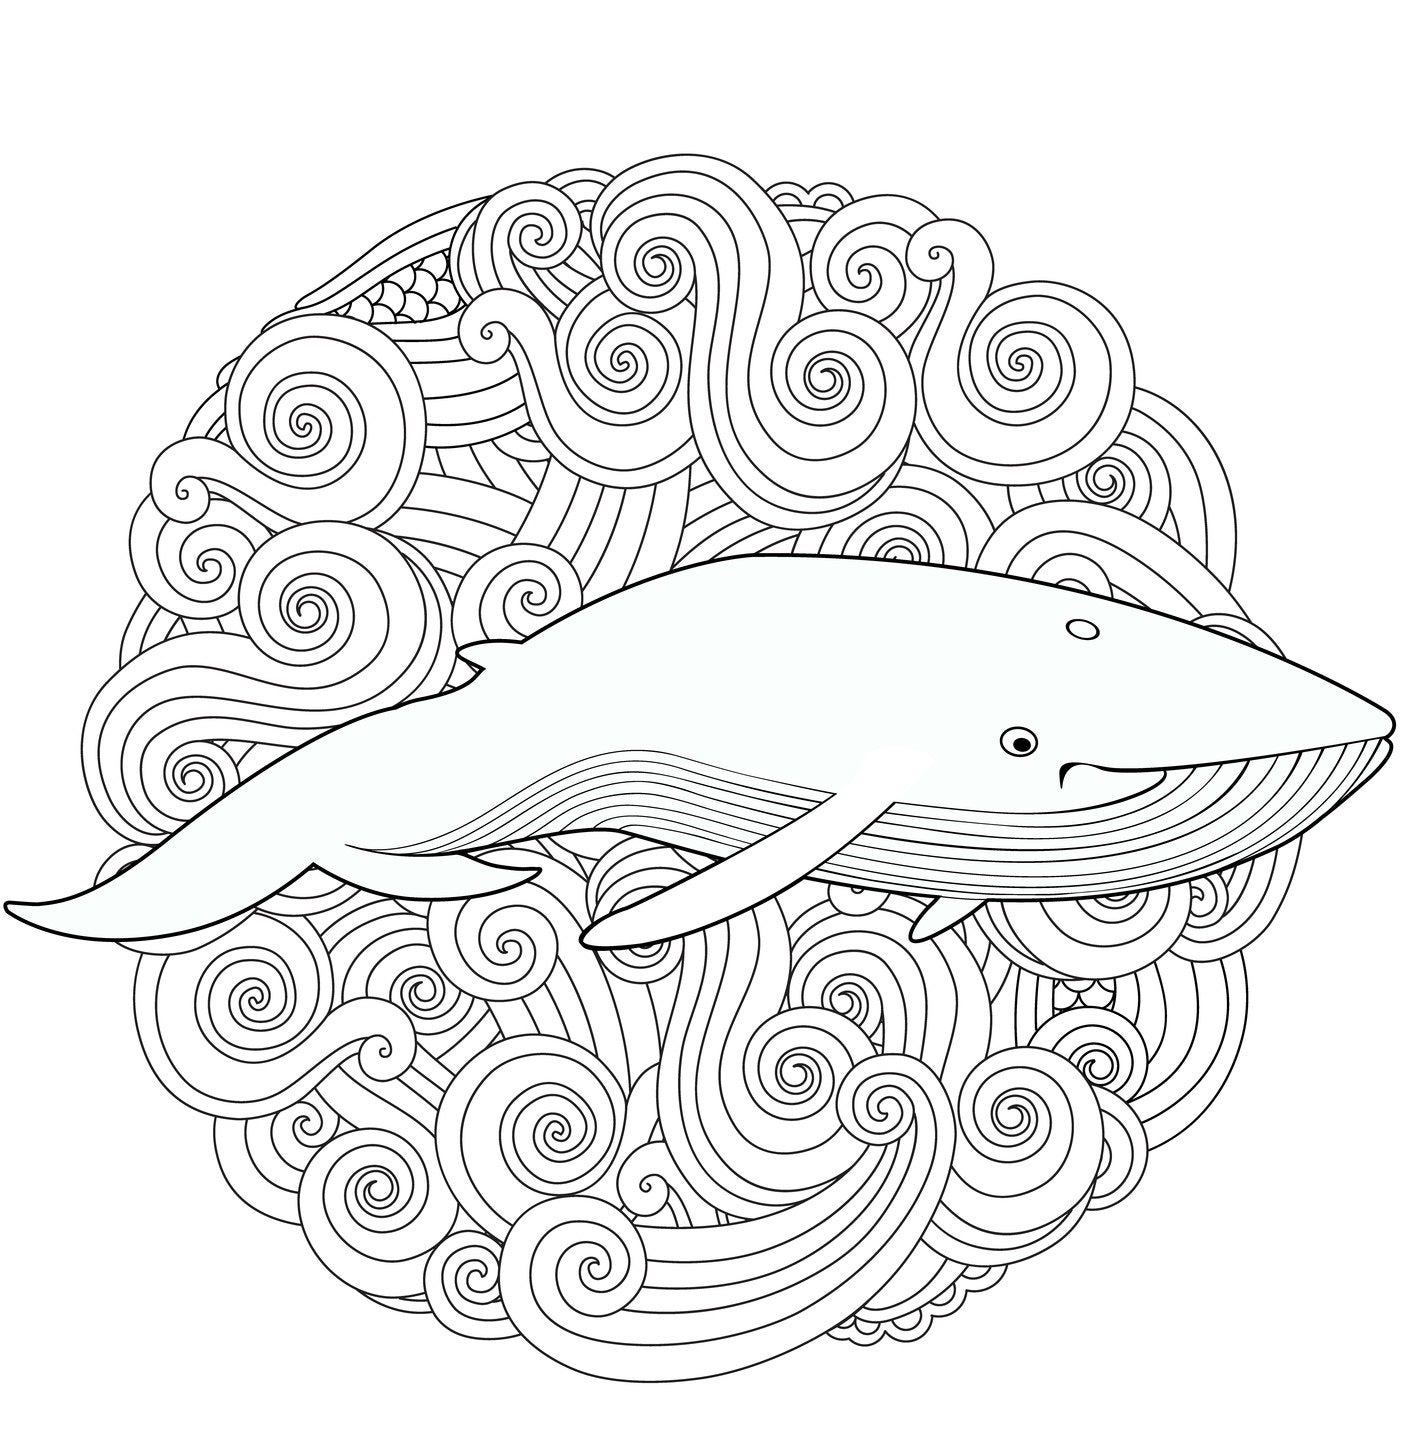 Whales - Magnificent Blue Whales In Relaxing Anti Stress Designs (PDF Book)